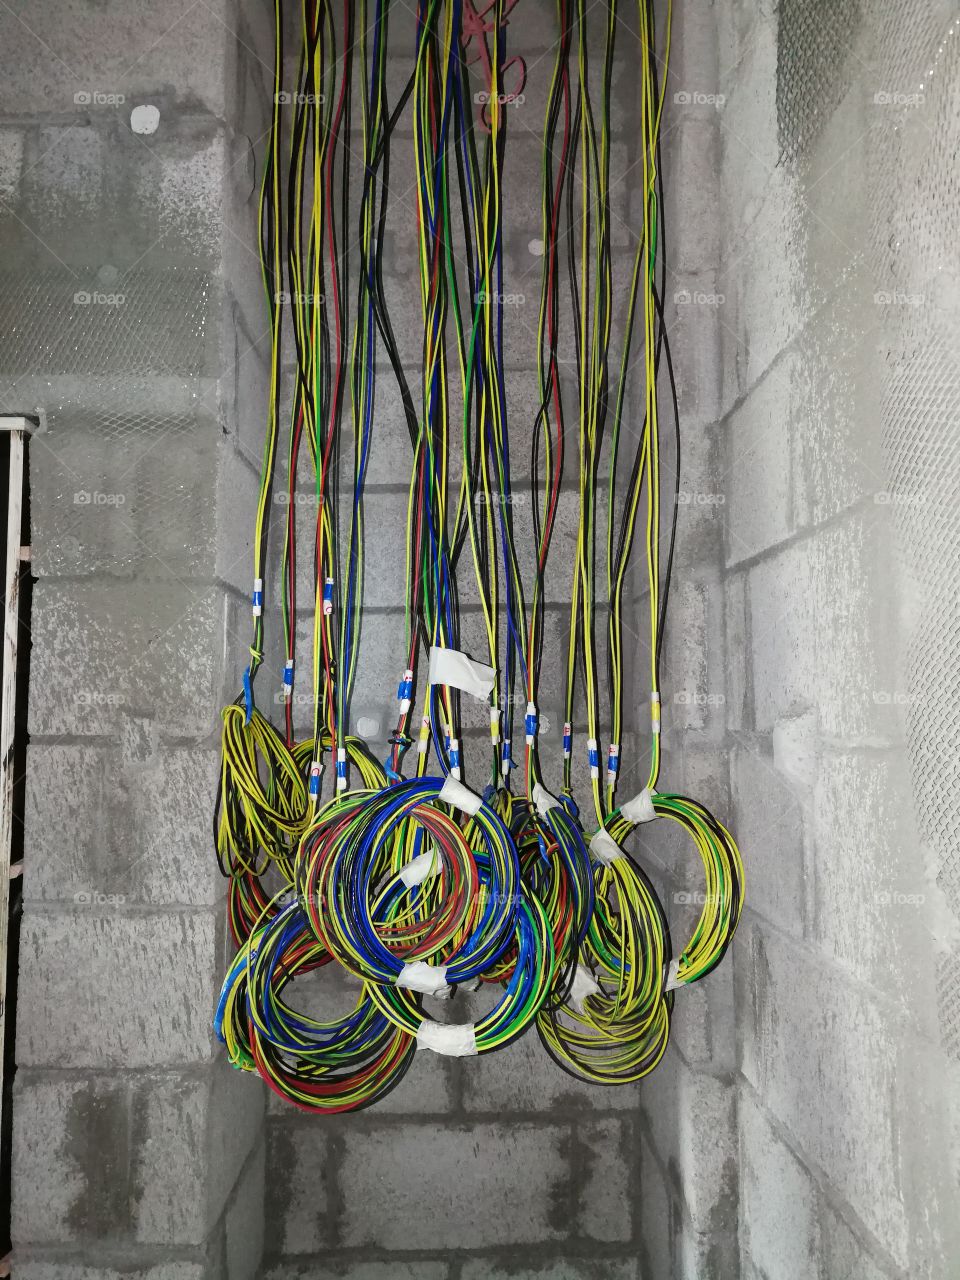 hanging cables, Cable work, Electric